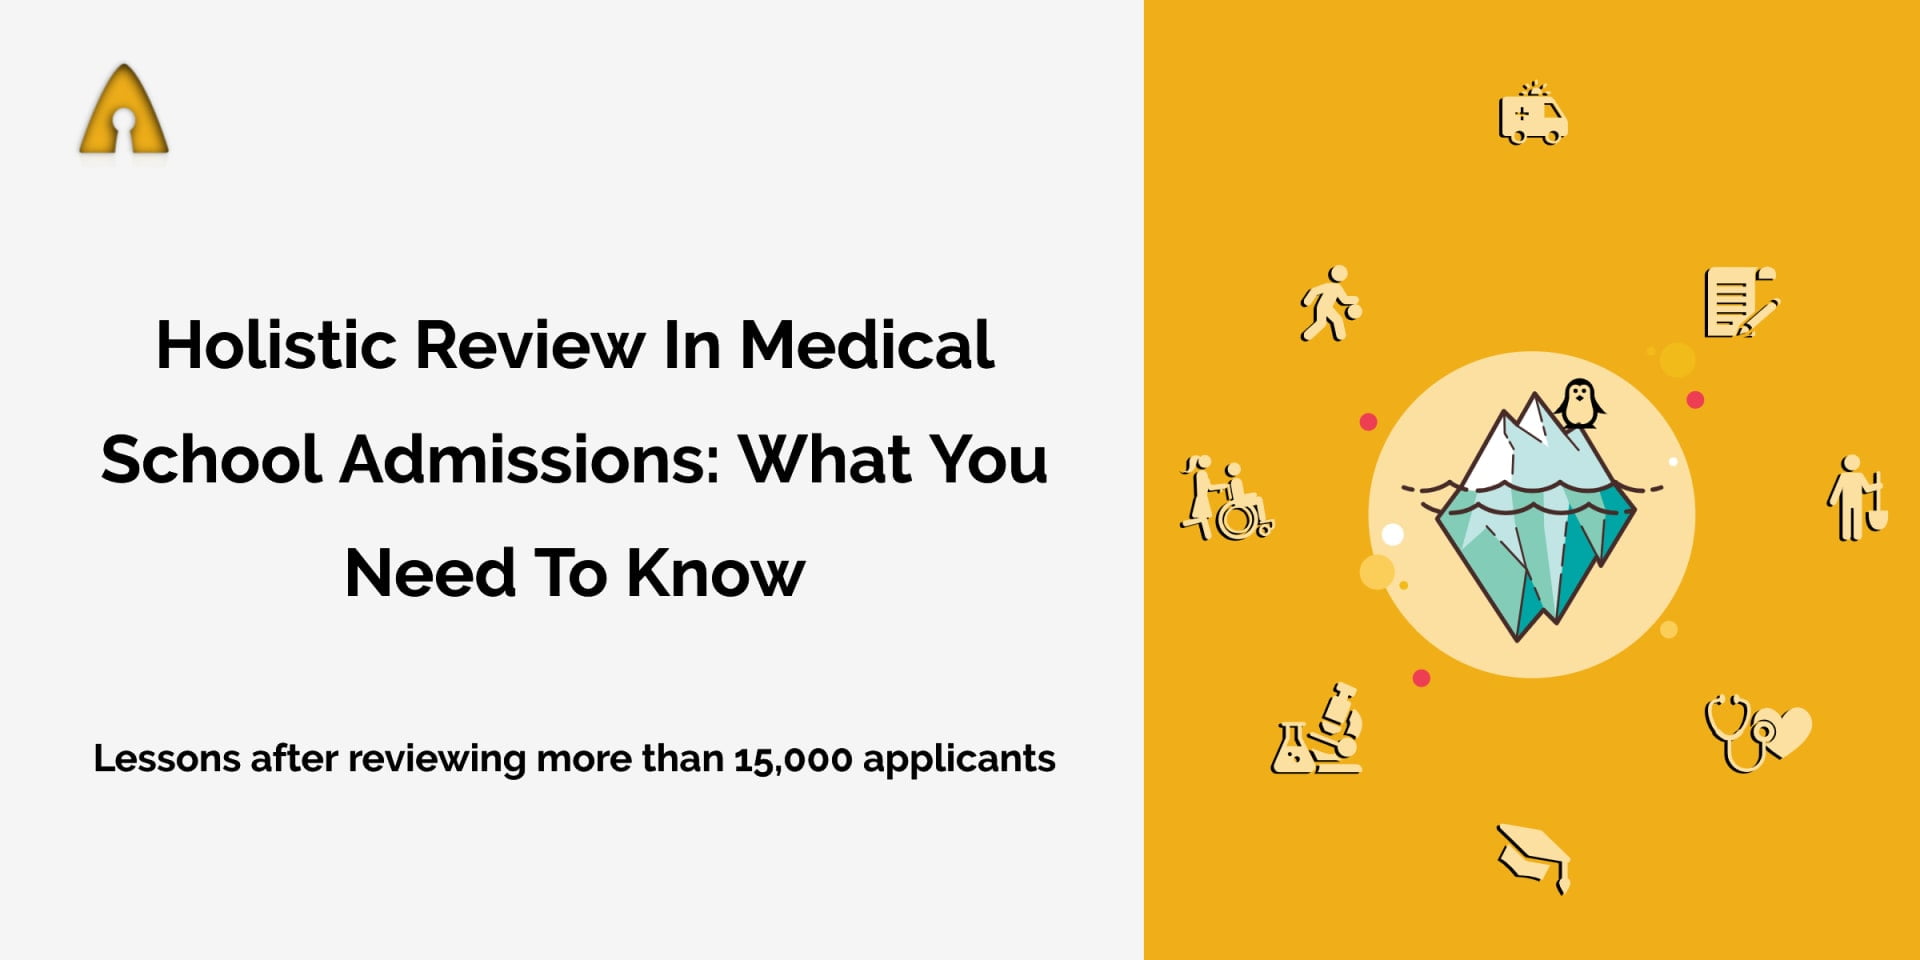 holistic review in medical school admissions: what you need to know